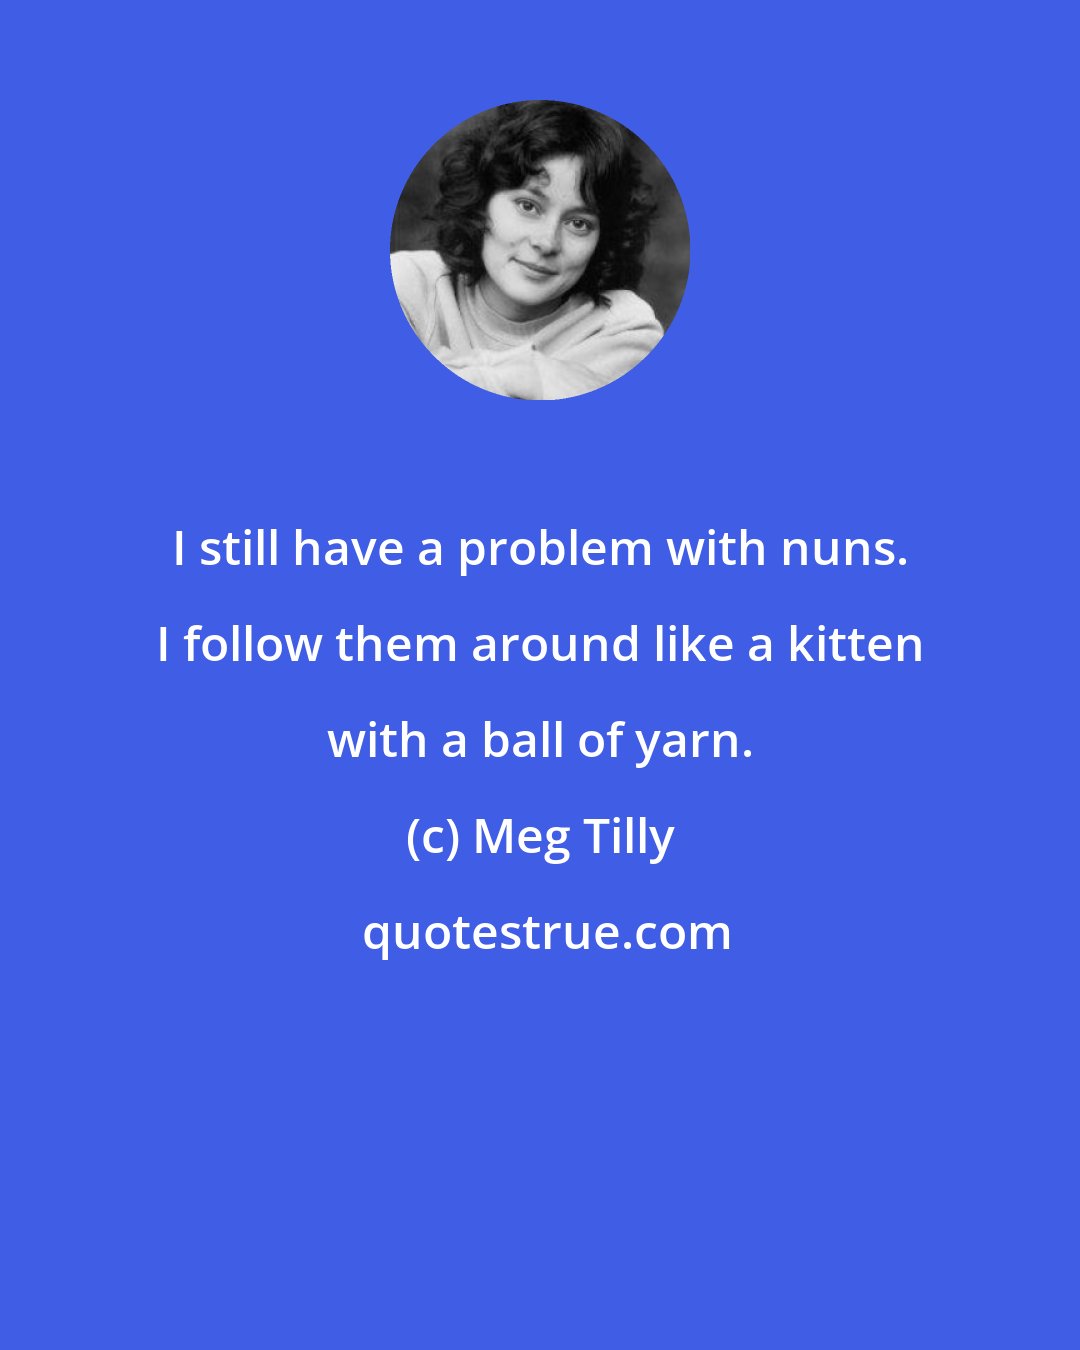 Meg Tilly: I still have a problem with nuns. I follow them around like a kitten with a ball of yarn.